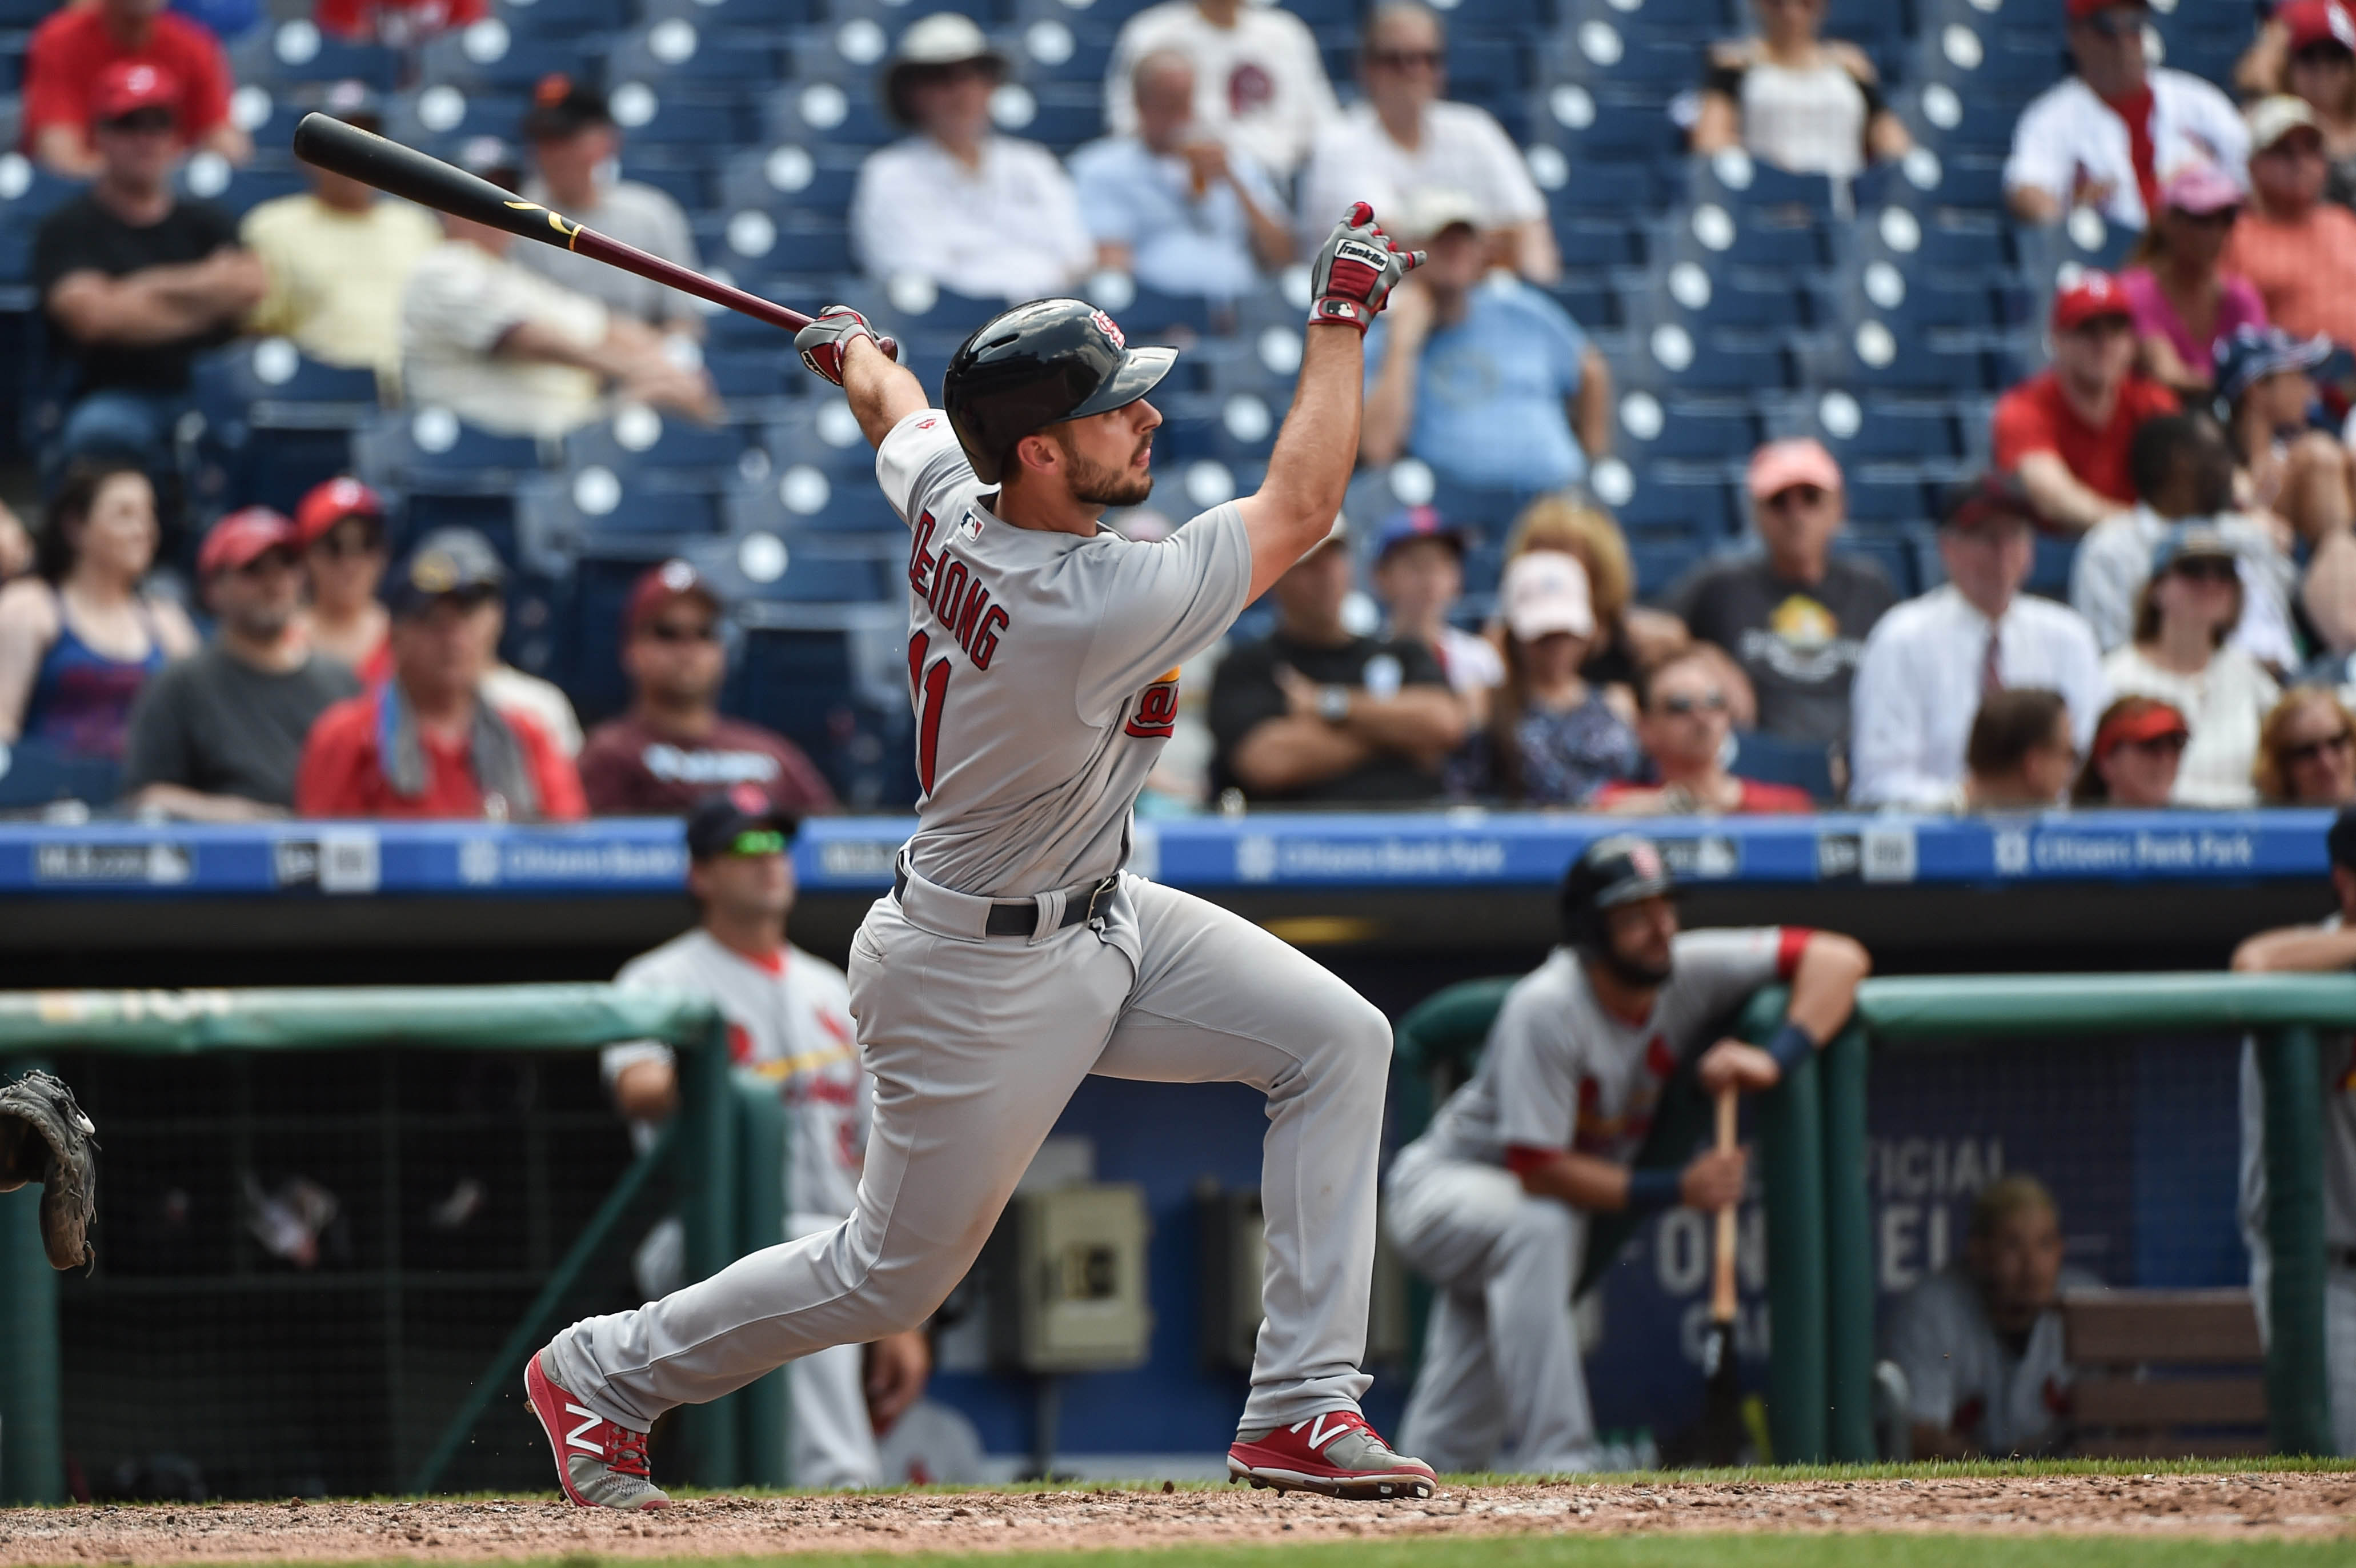 St. Louis Cardinals: Paul DeJong is audition for a trade